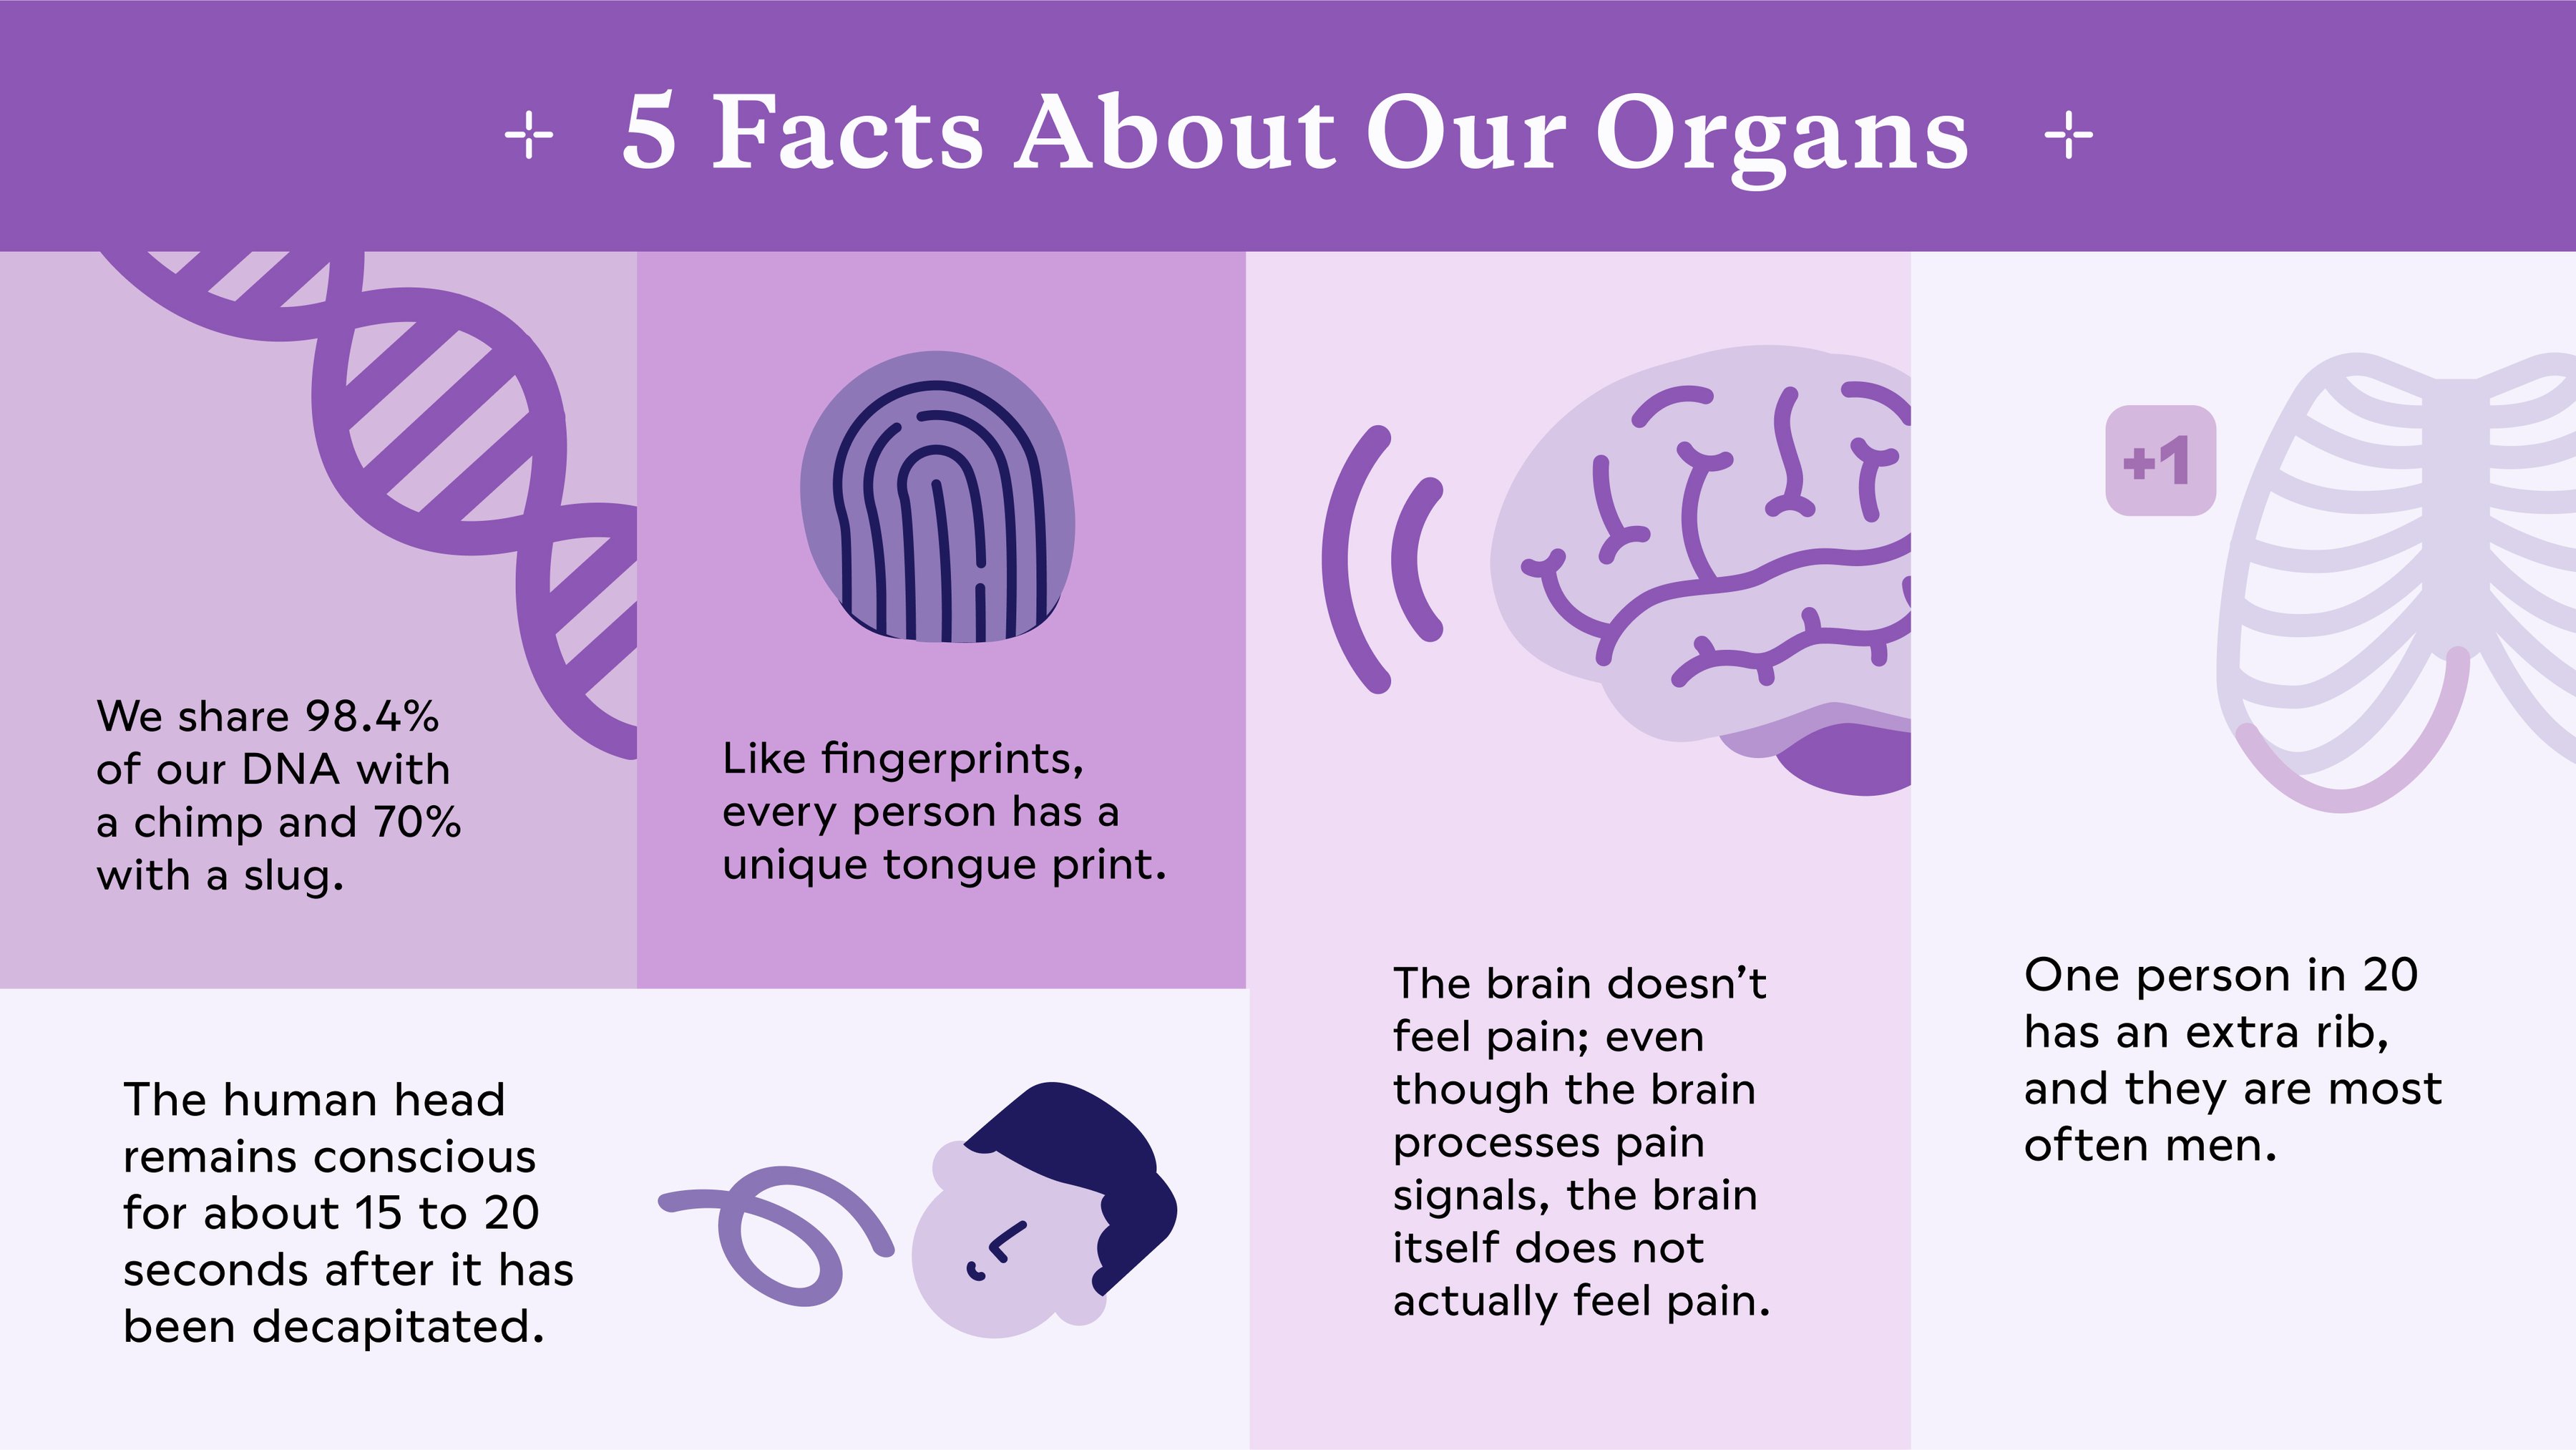 5 facts about organs